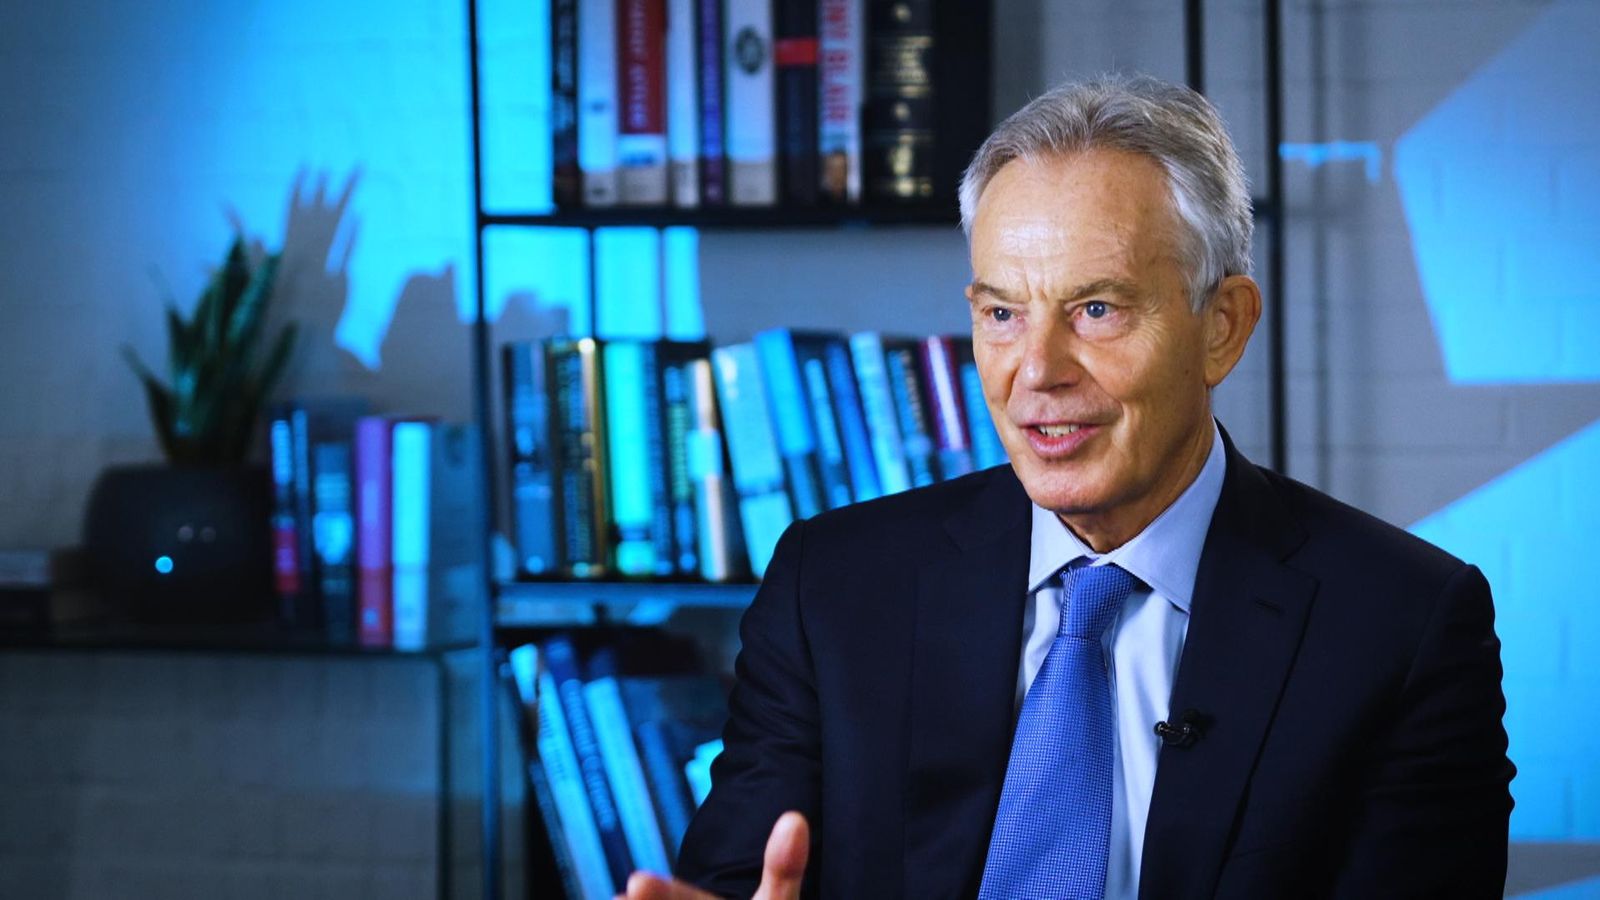 Tony Blair calls for 'leadership' as he reflects on 25 years since Good Friday Agreement